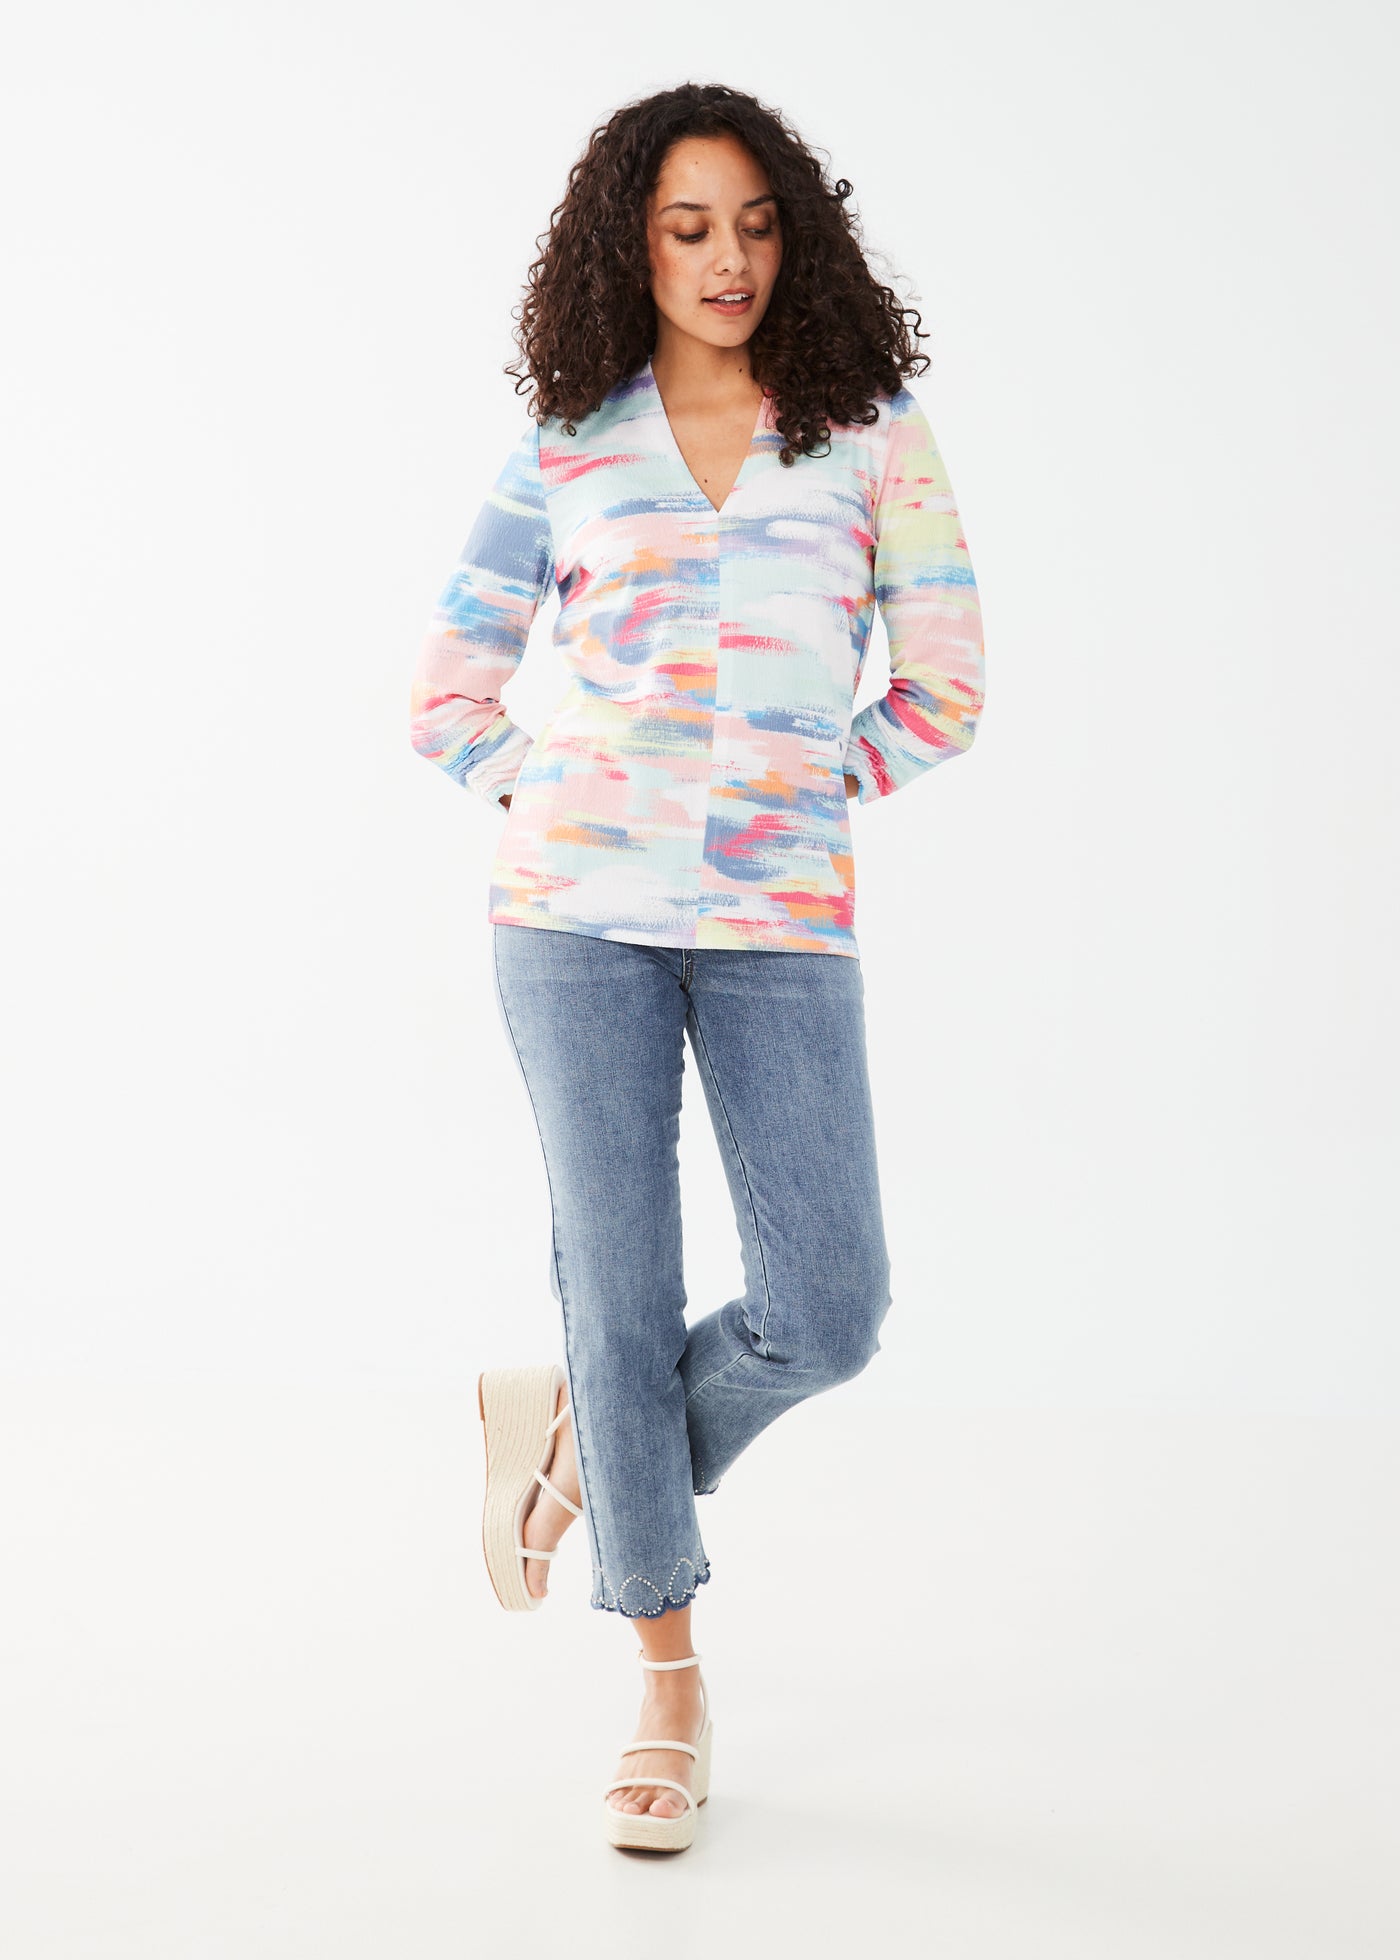 French Dressing Jeans 3/4 Sleeve V-Neck Top 